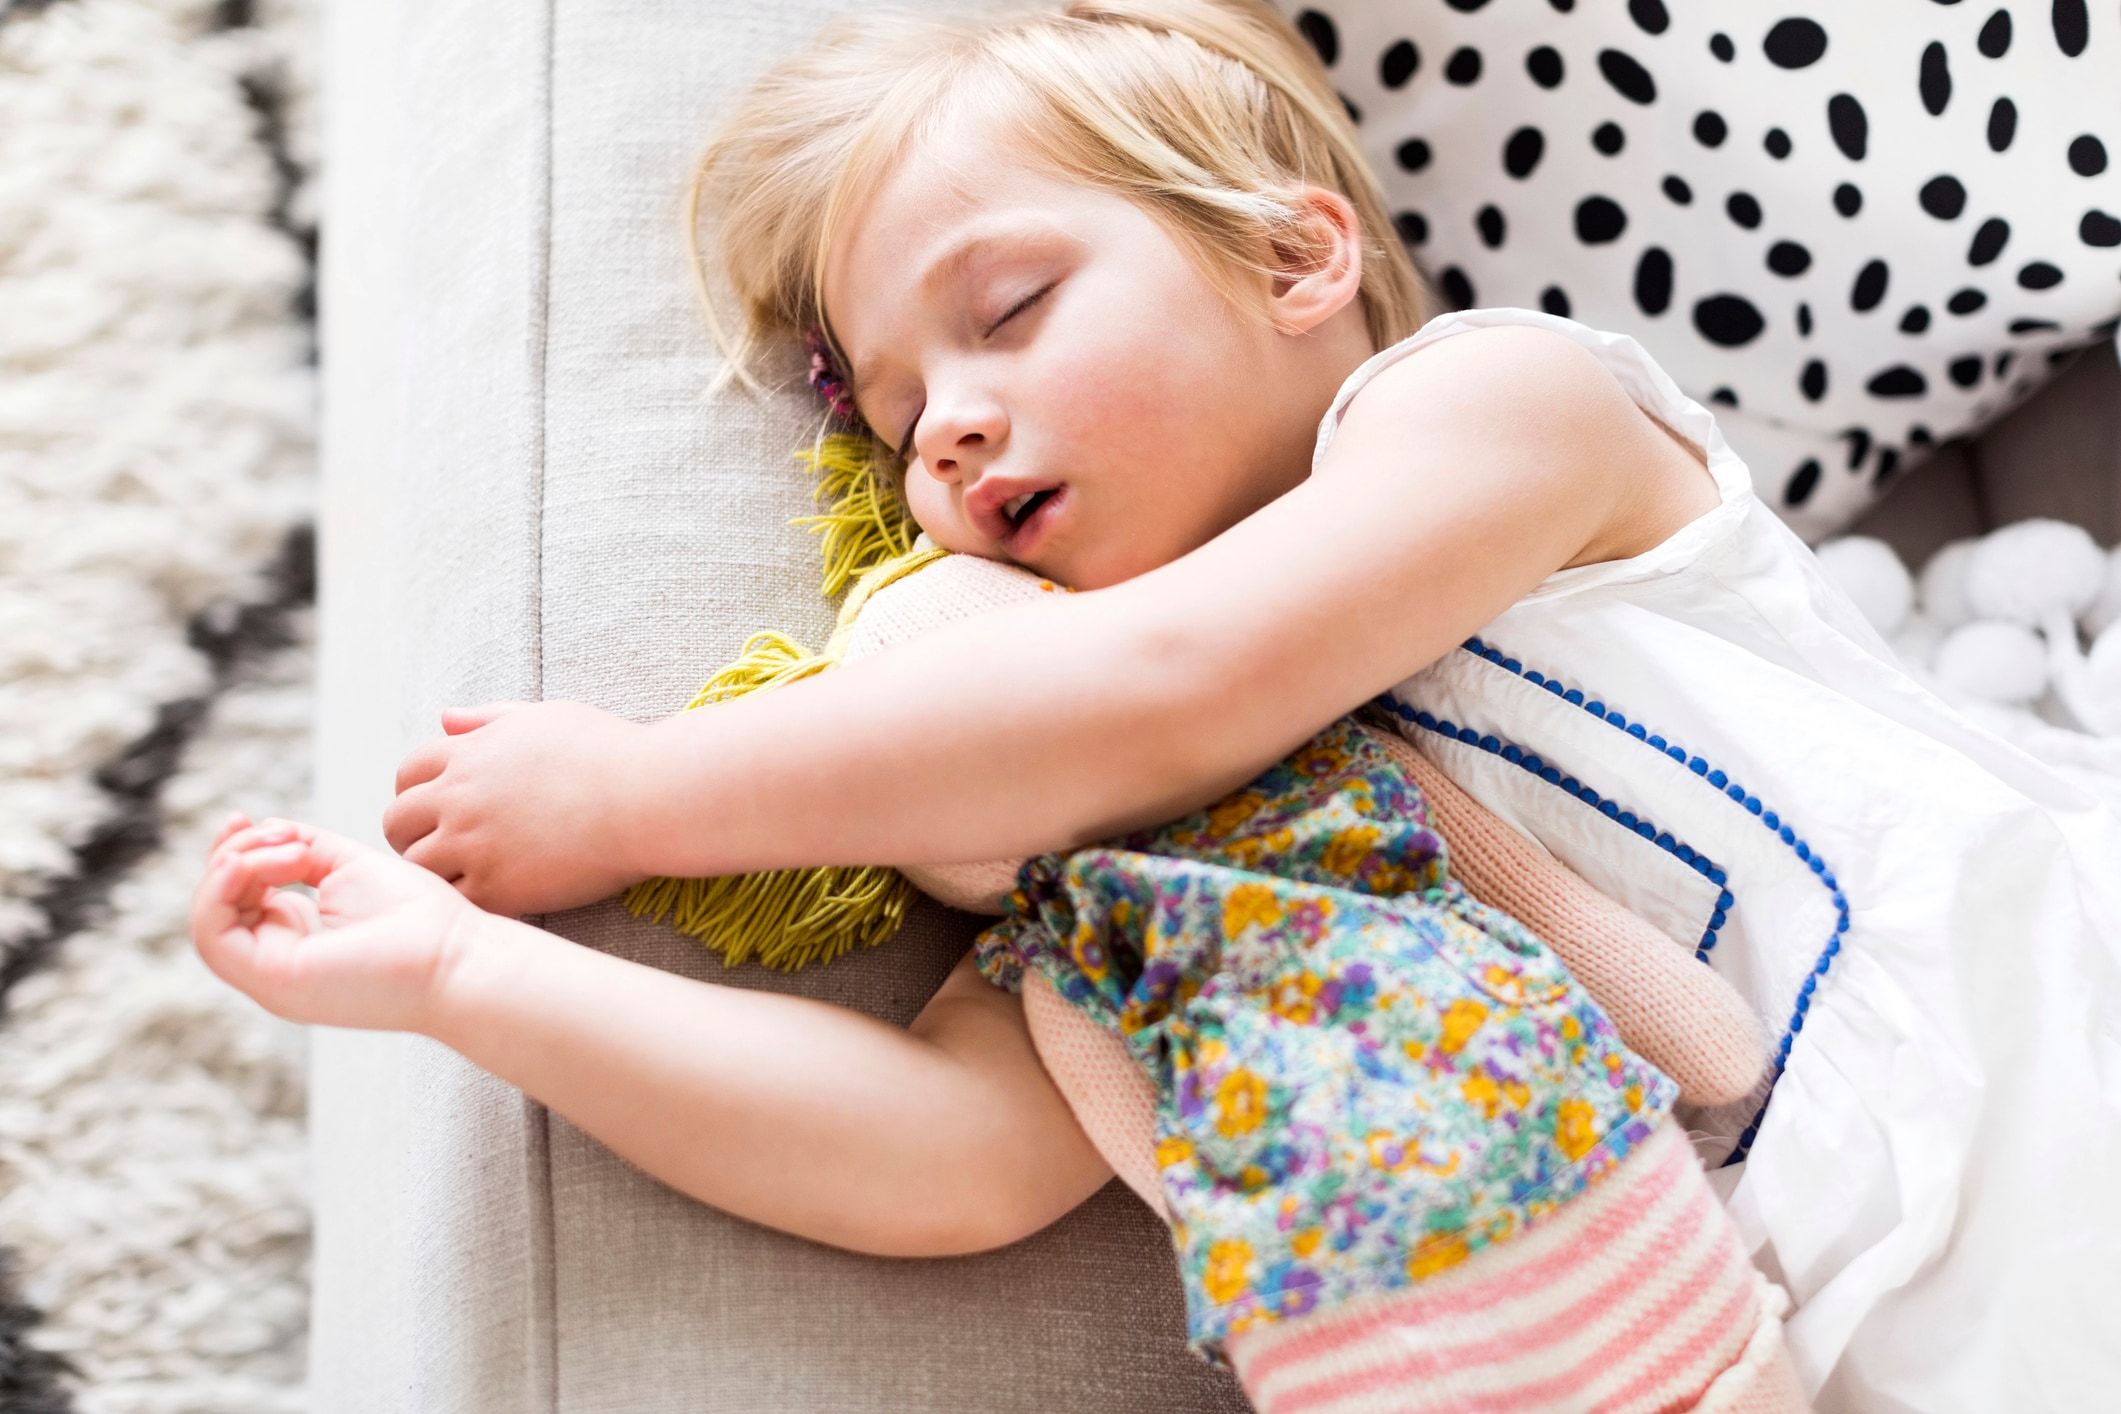 7 proven ways to get your kid down for a nap — without a fuss